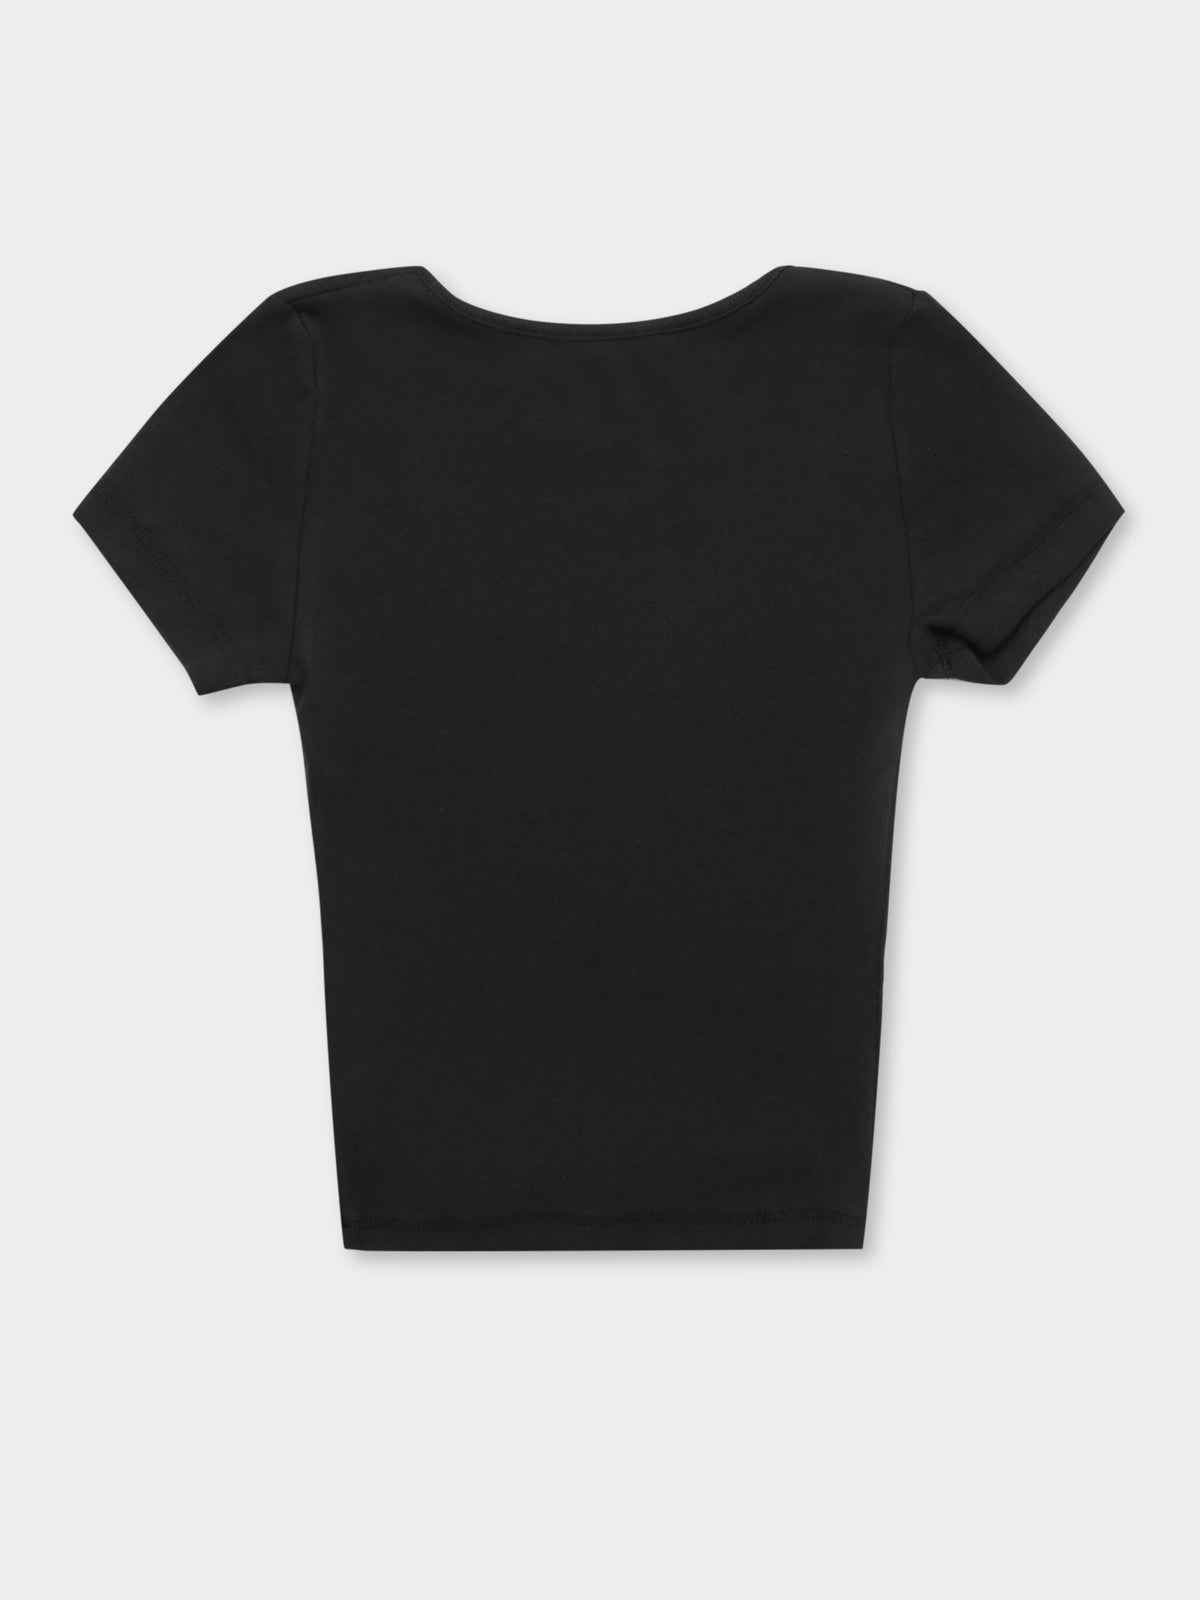 Bowie Cut Out T-Shirt in Black